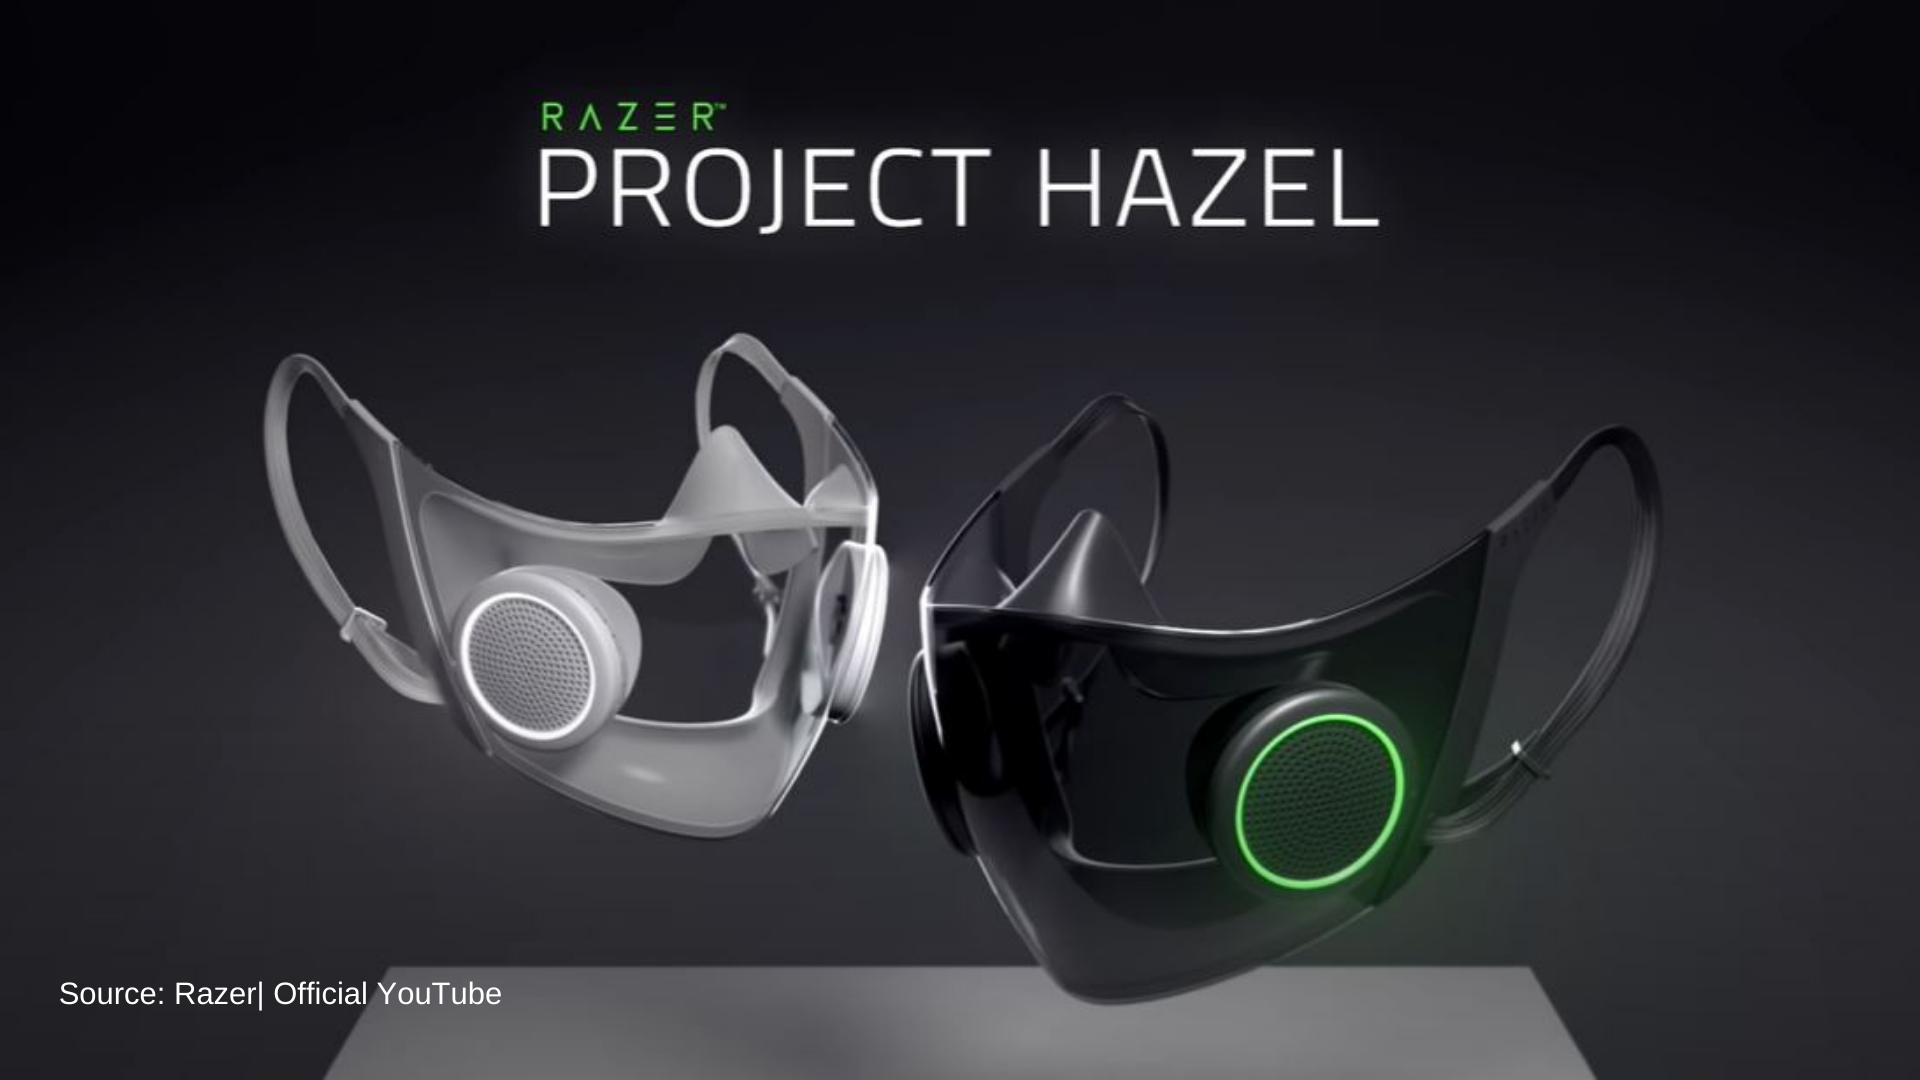 Gaming Brand Razer Introduces Prototype N95 Mask with RGB and VoiceAmp Tech